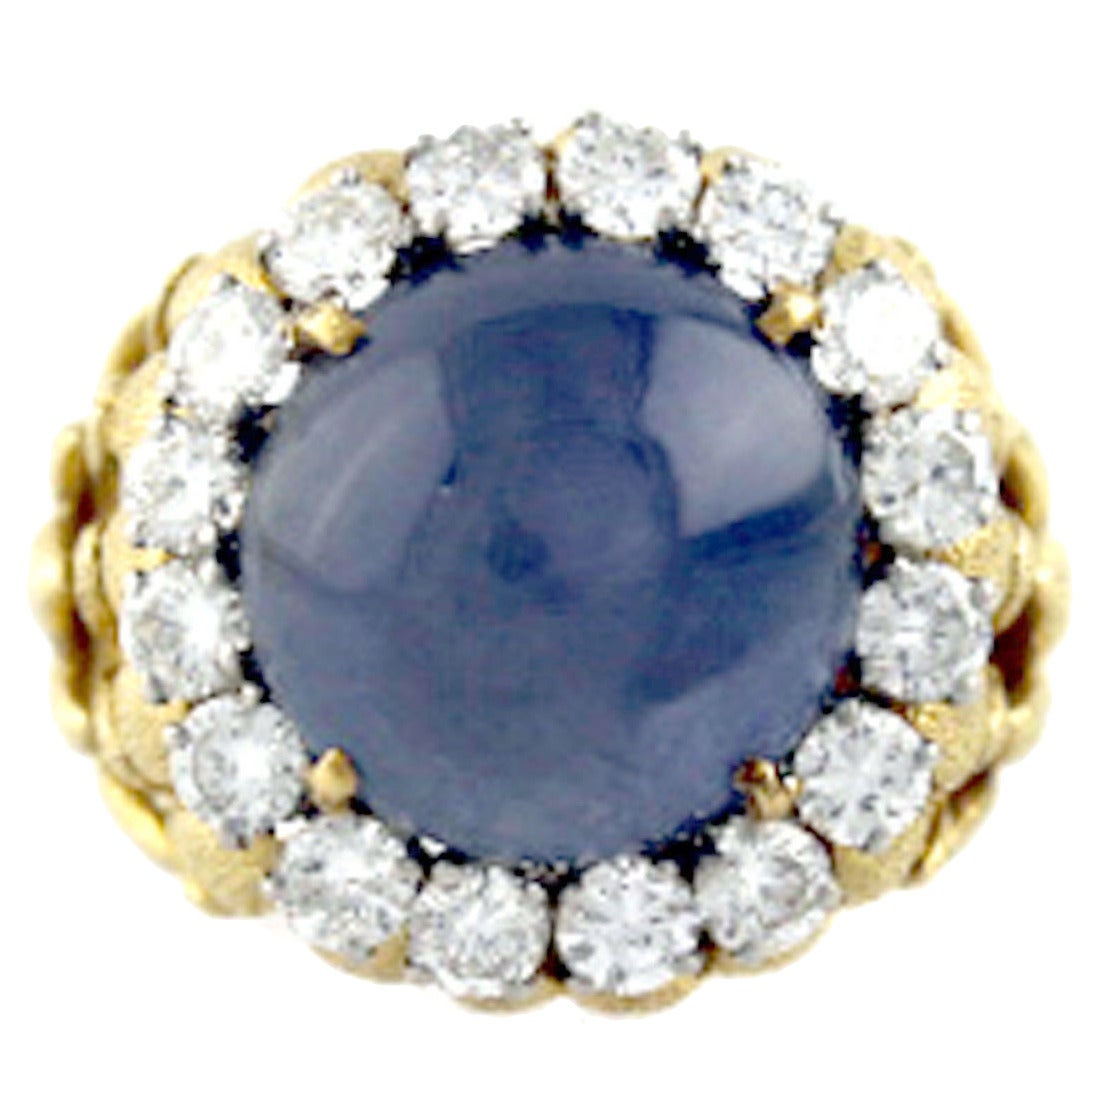 18 karat yellow gold ring by renowned designer Webb.  The ring features one cabochon cut star sapphire gemstone weighing approximately 18 carats.  Set in platinum surrounding the star sapphire are sixteen round brilliant cut diamonds weighing